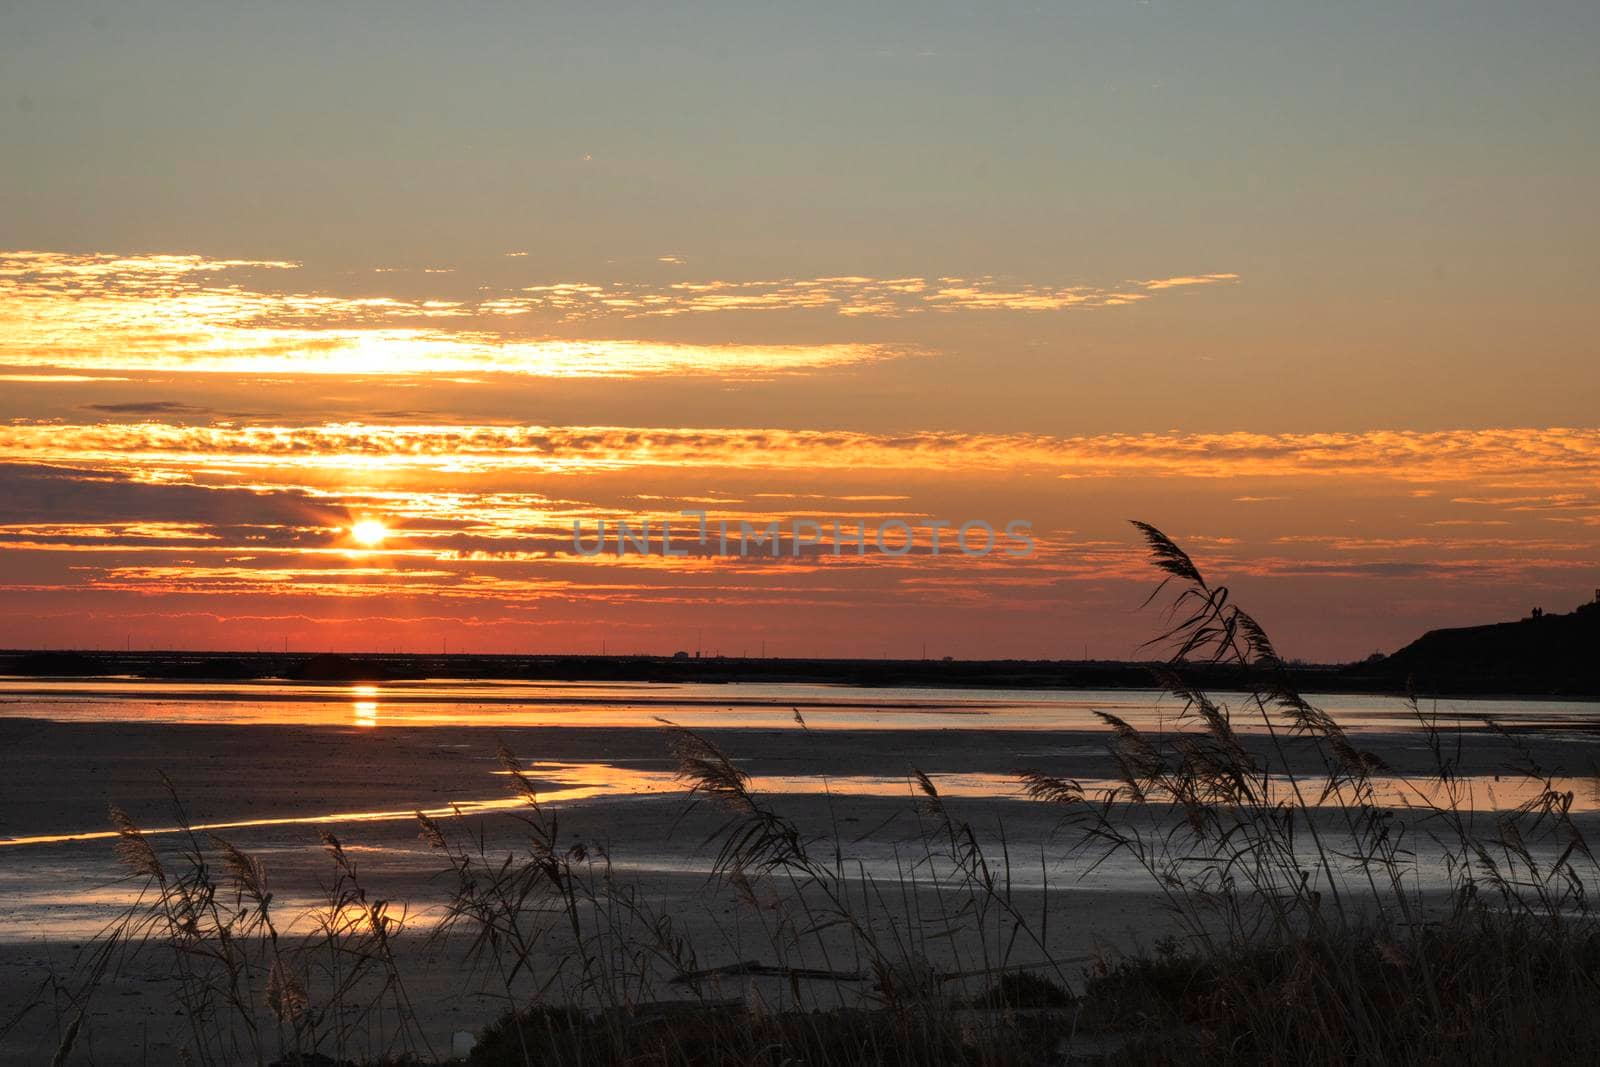 Sunset view of a beach with some plants in the foreground i La Camargue in France